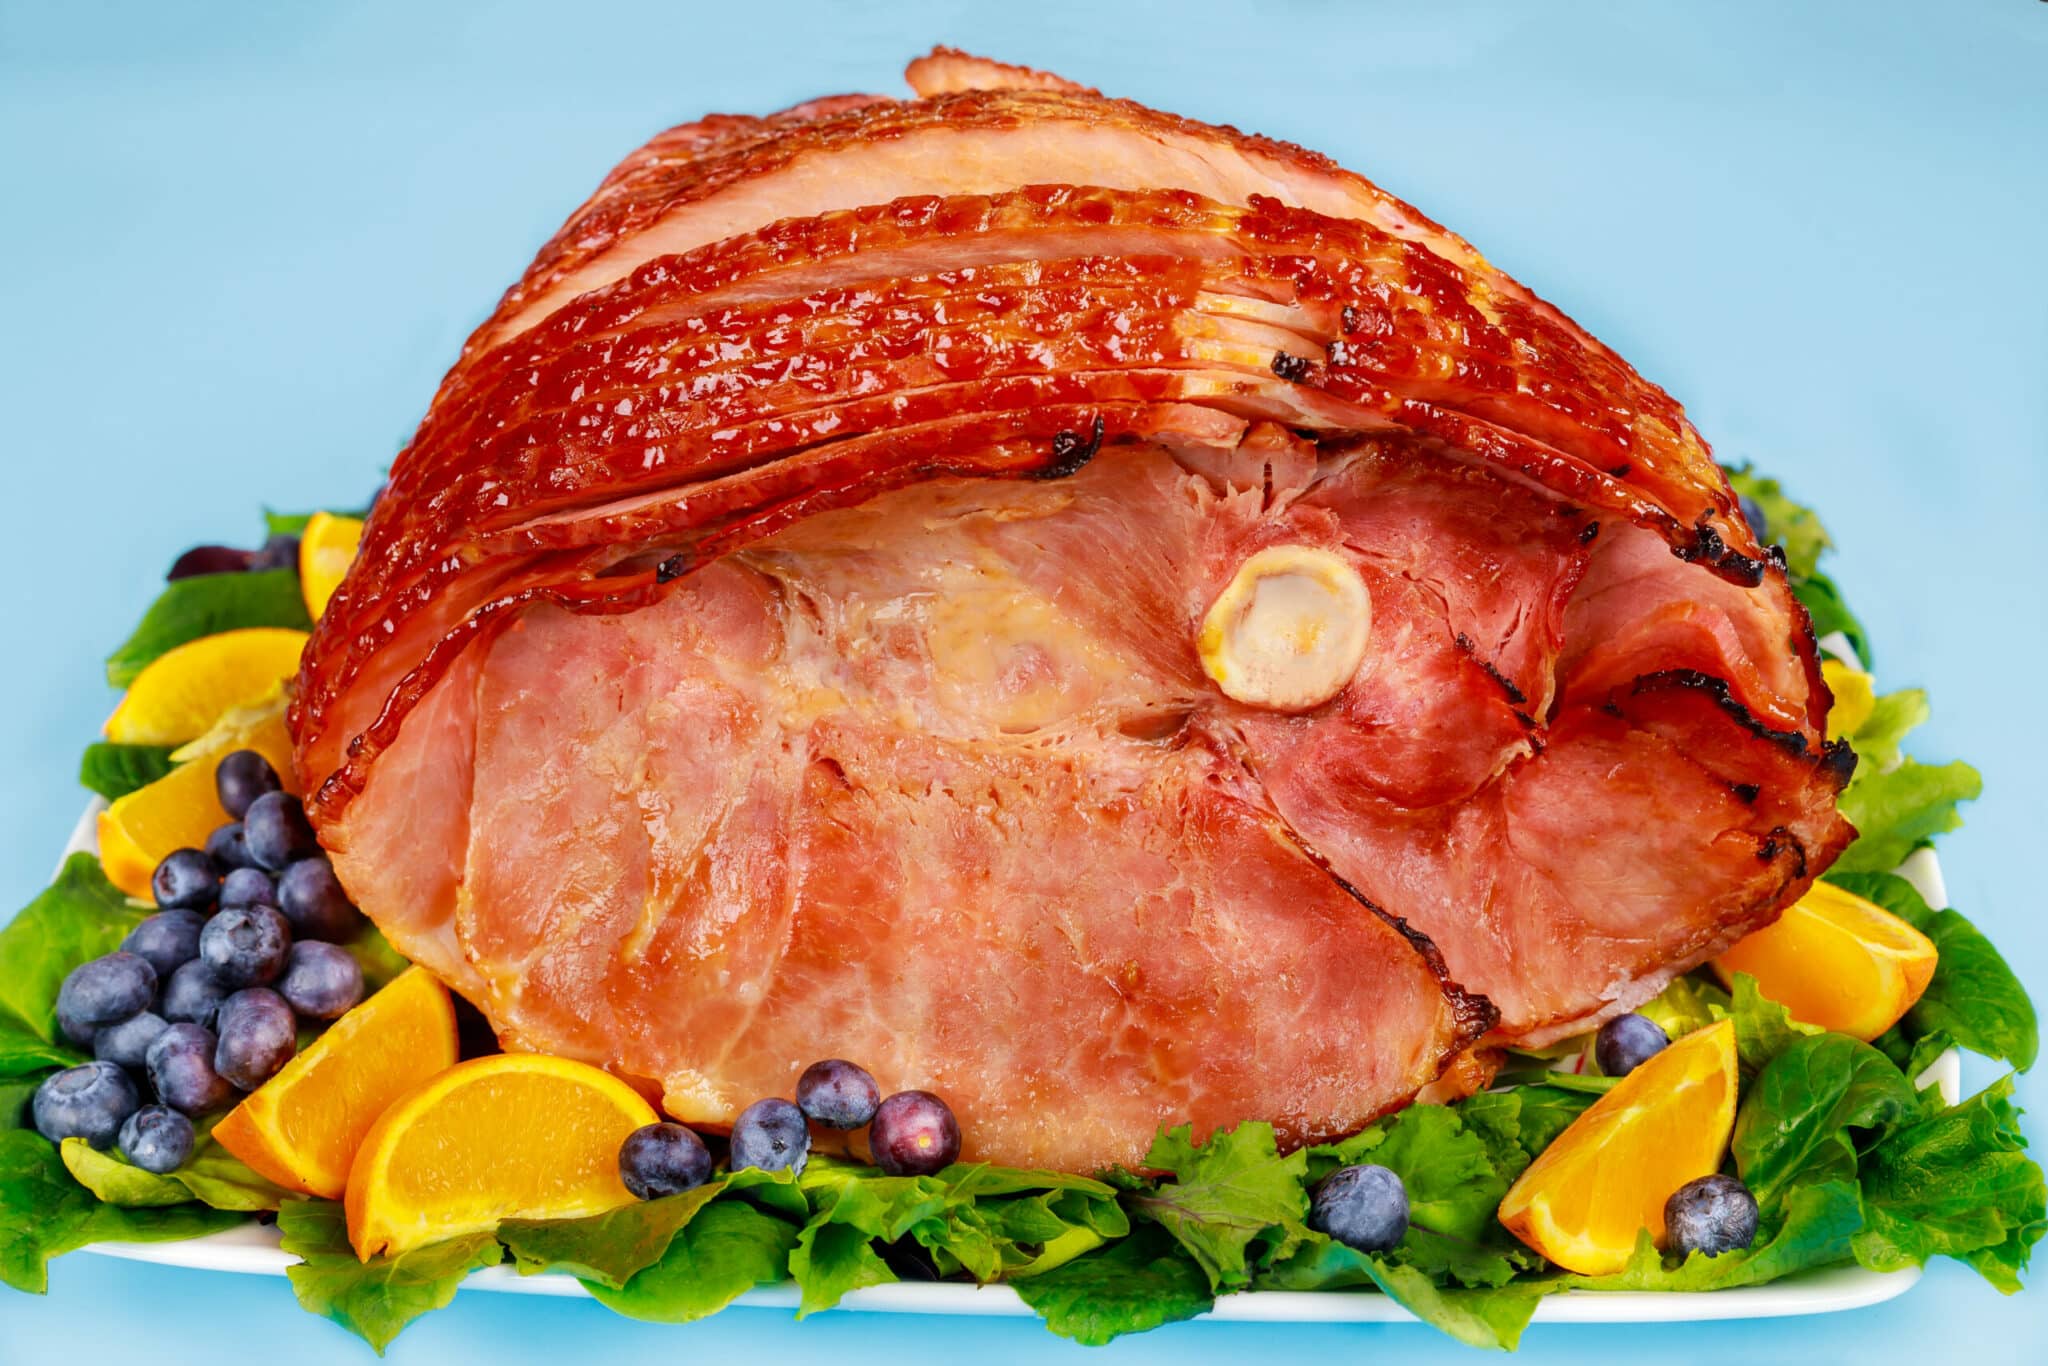 How To Cook A Pre-Cooked Spiral Ham